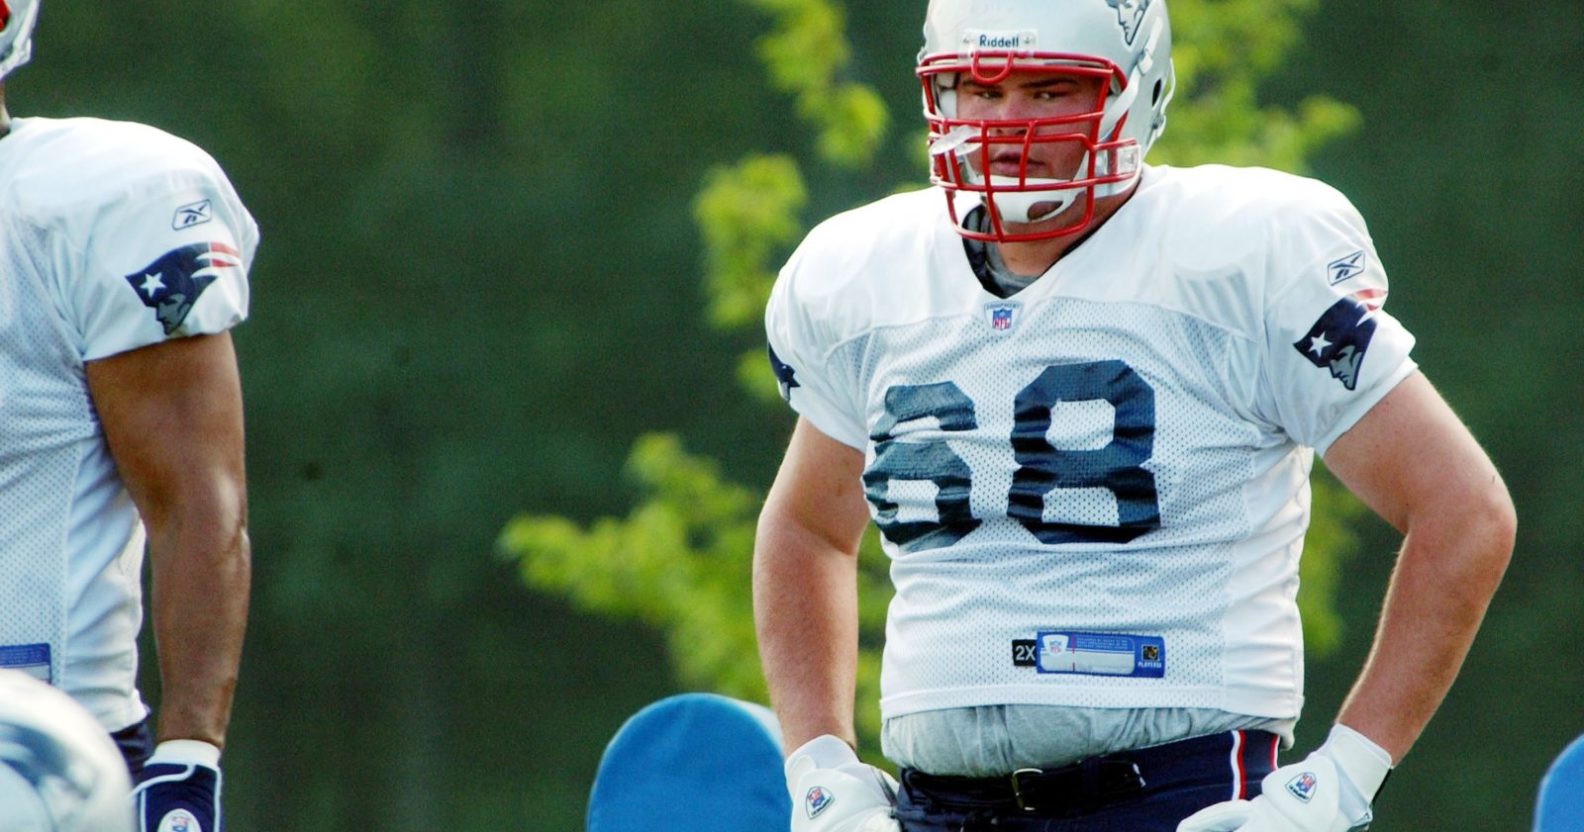 FOXBORO - JULY 28: Guard Ryan O'Callaghan #68 of the New England Patriots works out during the first summer training camp practice on July 28, 2006 at Gillete Stadium in Foxboro, Massachusetts. (Photo by Darren McCollester/Getty Images)